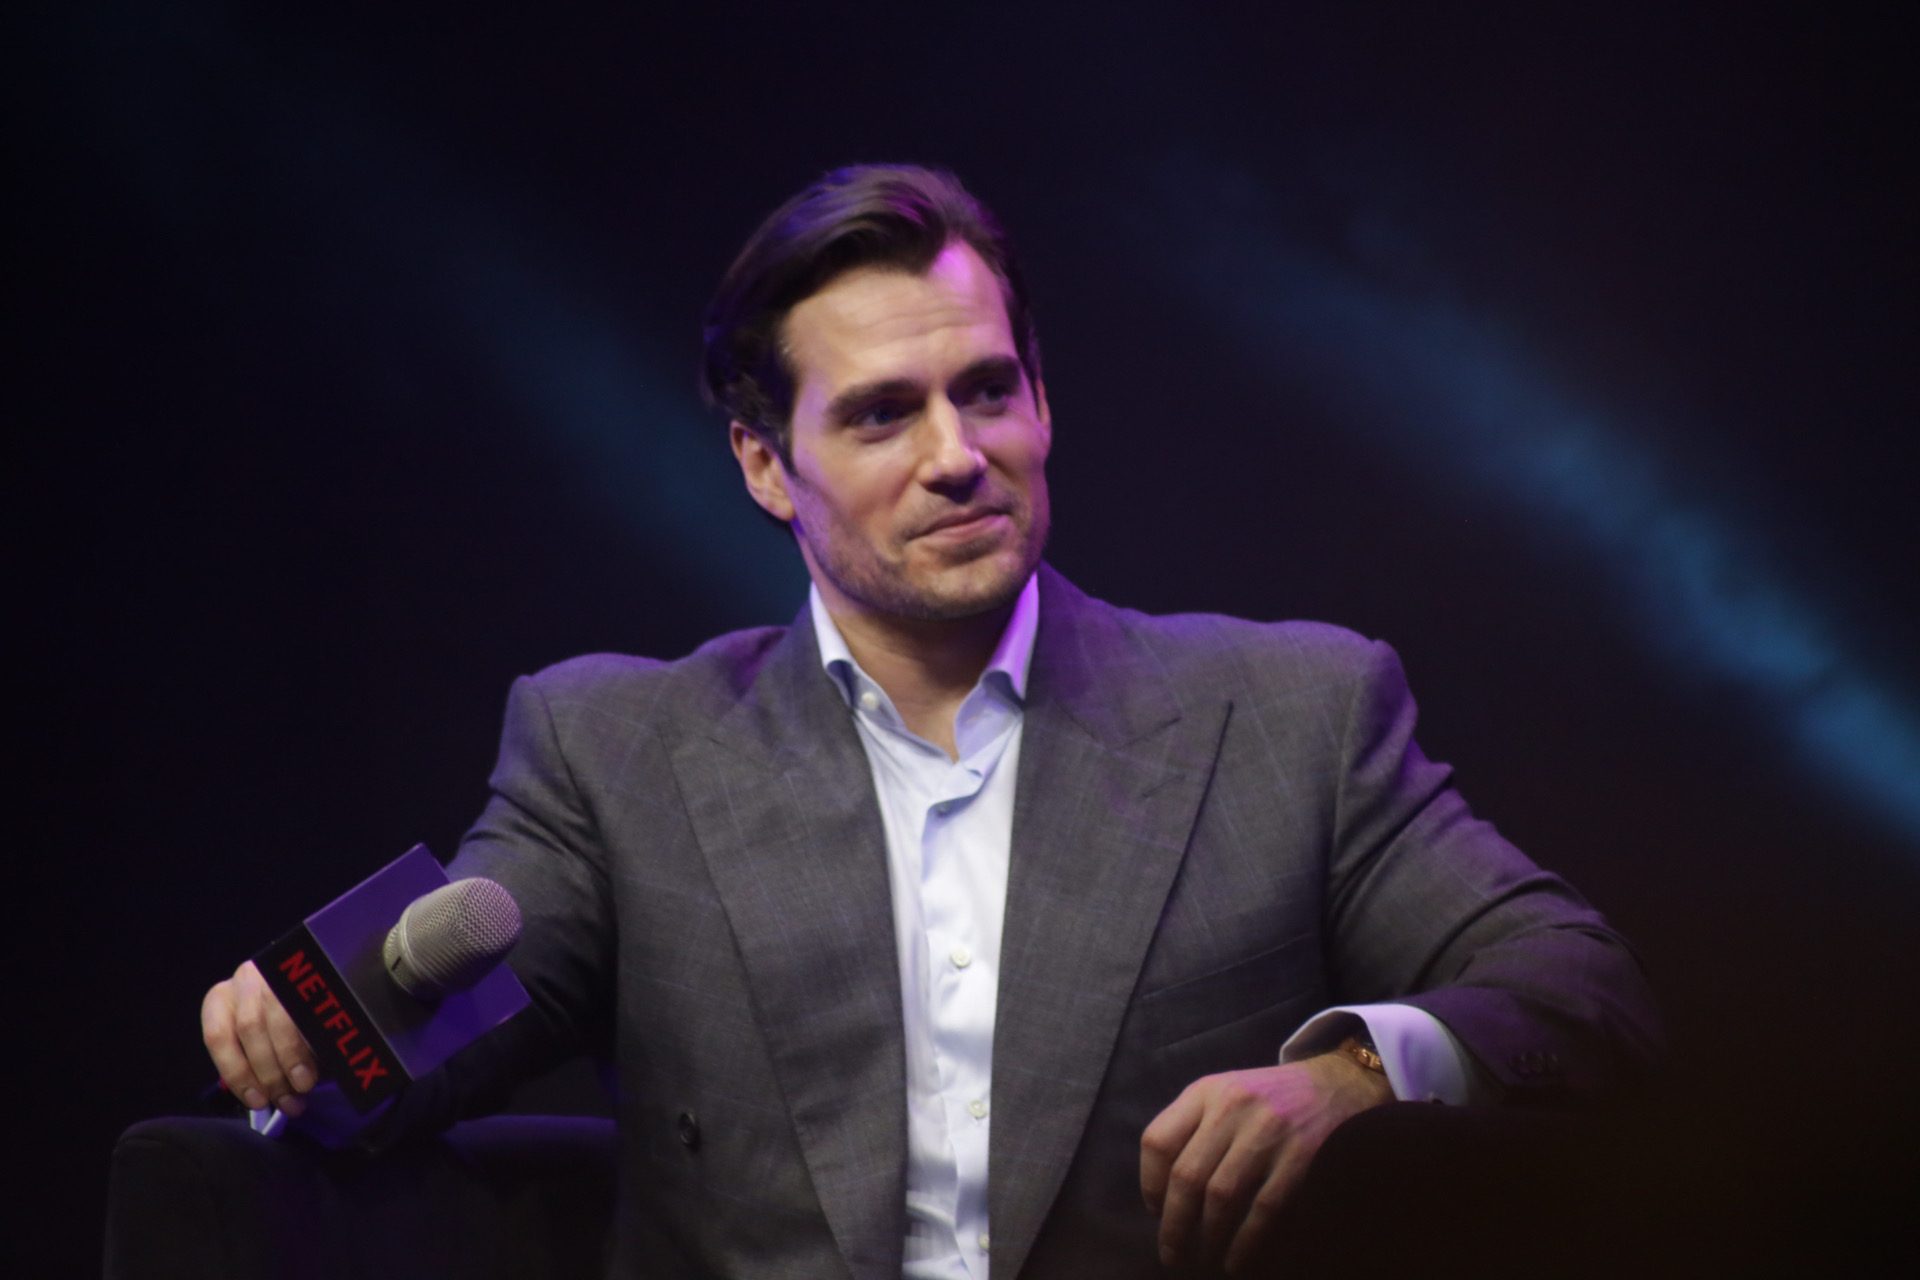 IN PHOTOS: Henry Cavill meets ‘The Witcher’ fans in Manila